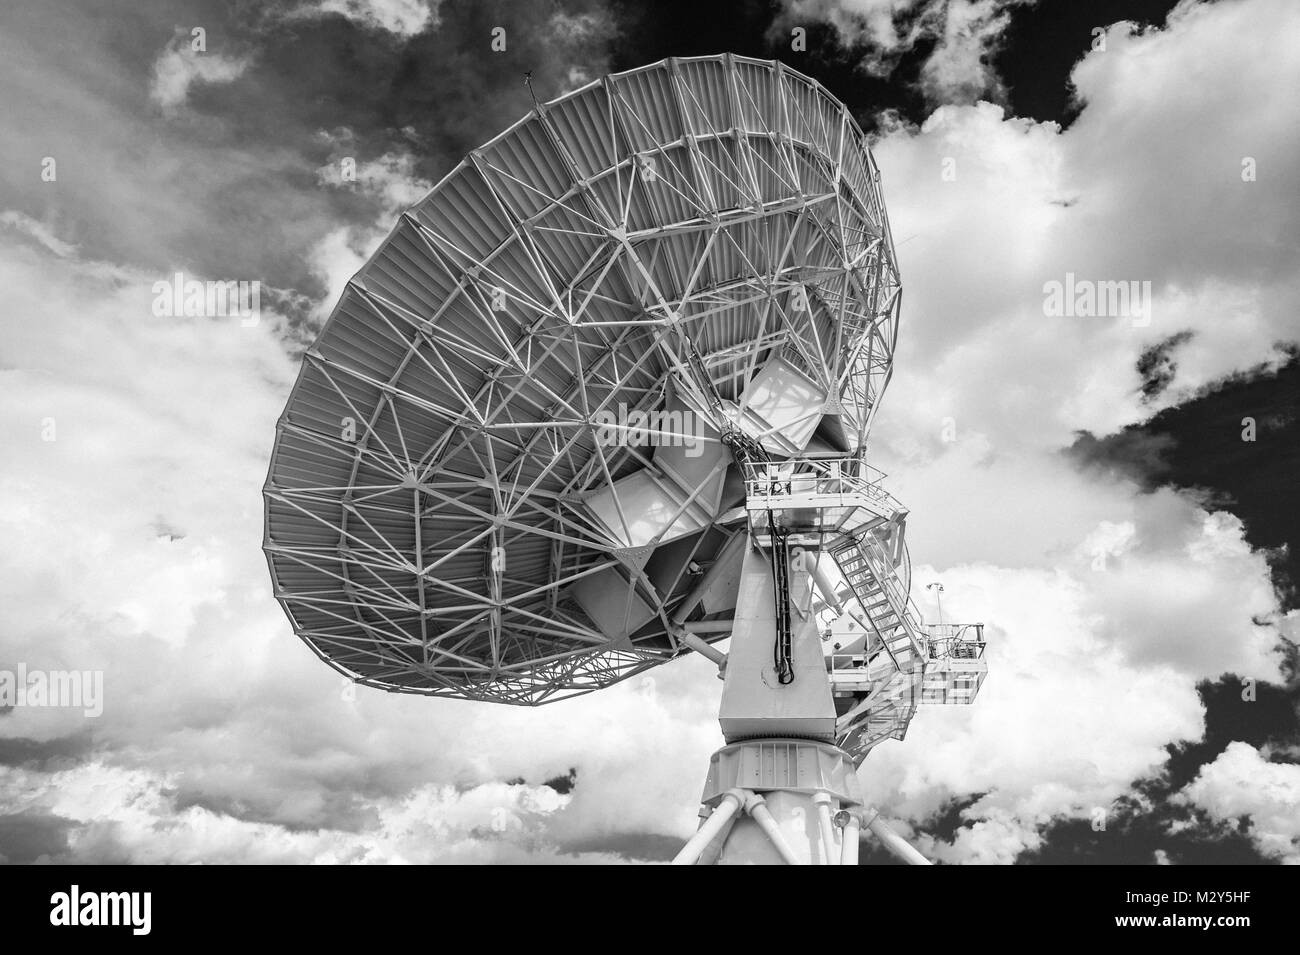 Black & White Photograph of a Very Large Array (VLA) Radio Telescope located at the National Radio Astronomy Observatory Site in Socorro, New Mexico. Stock Photo